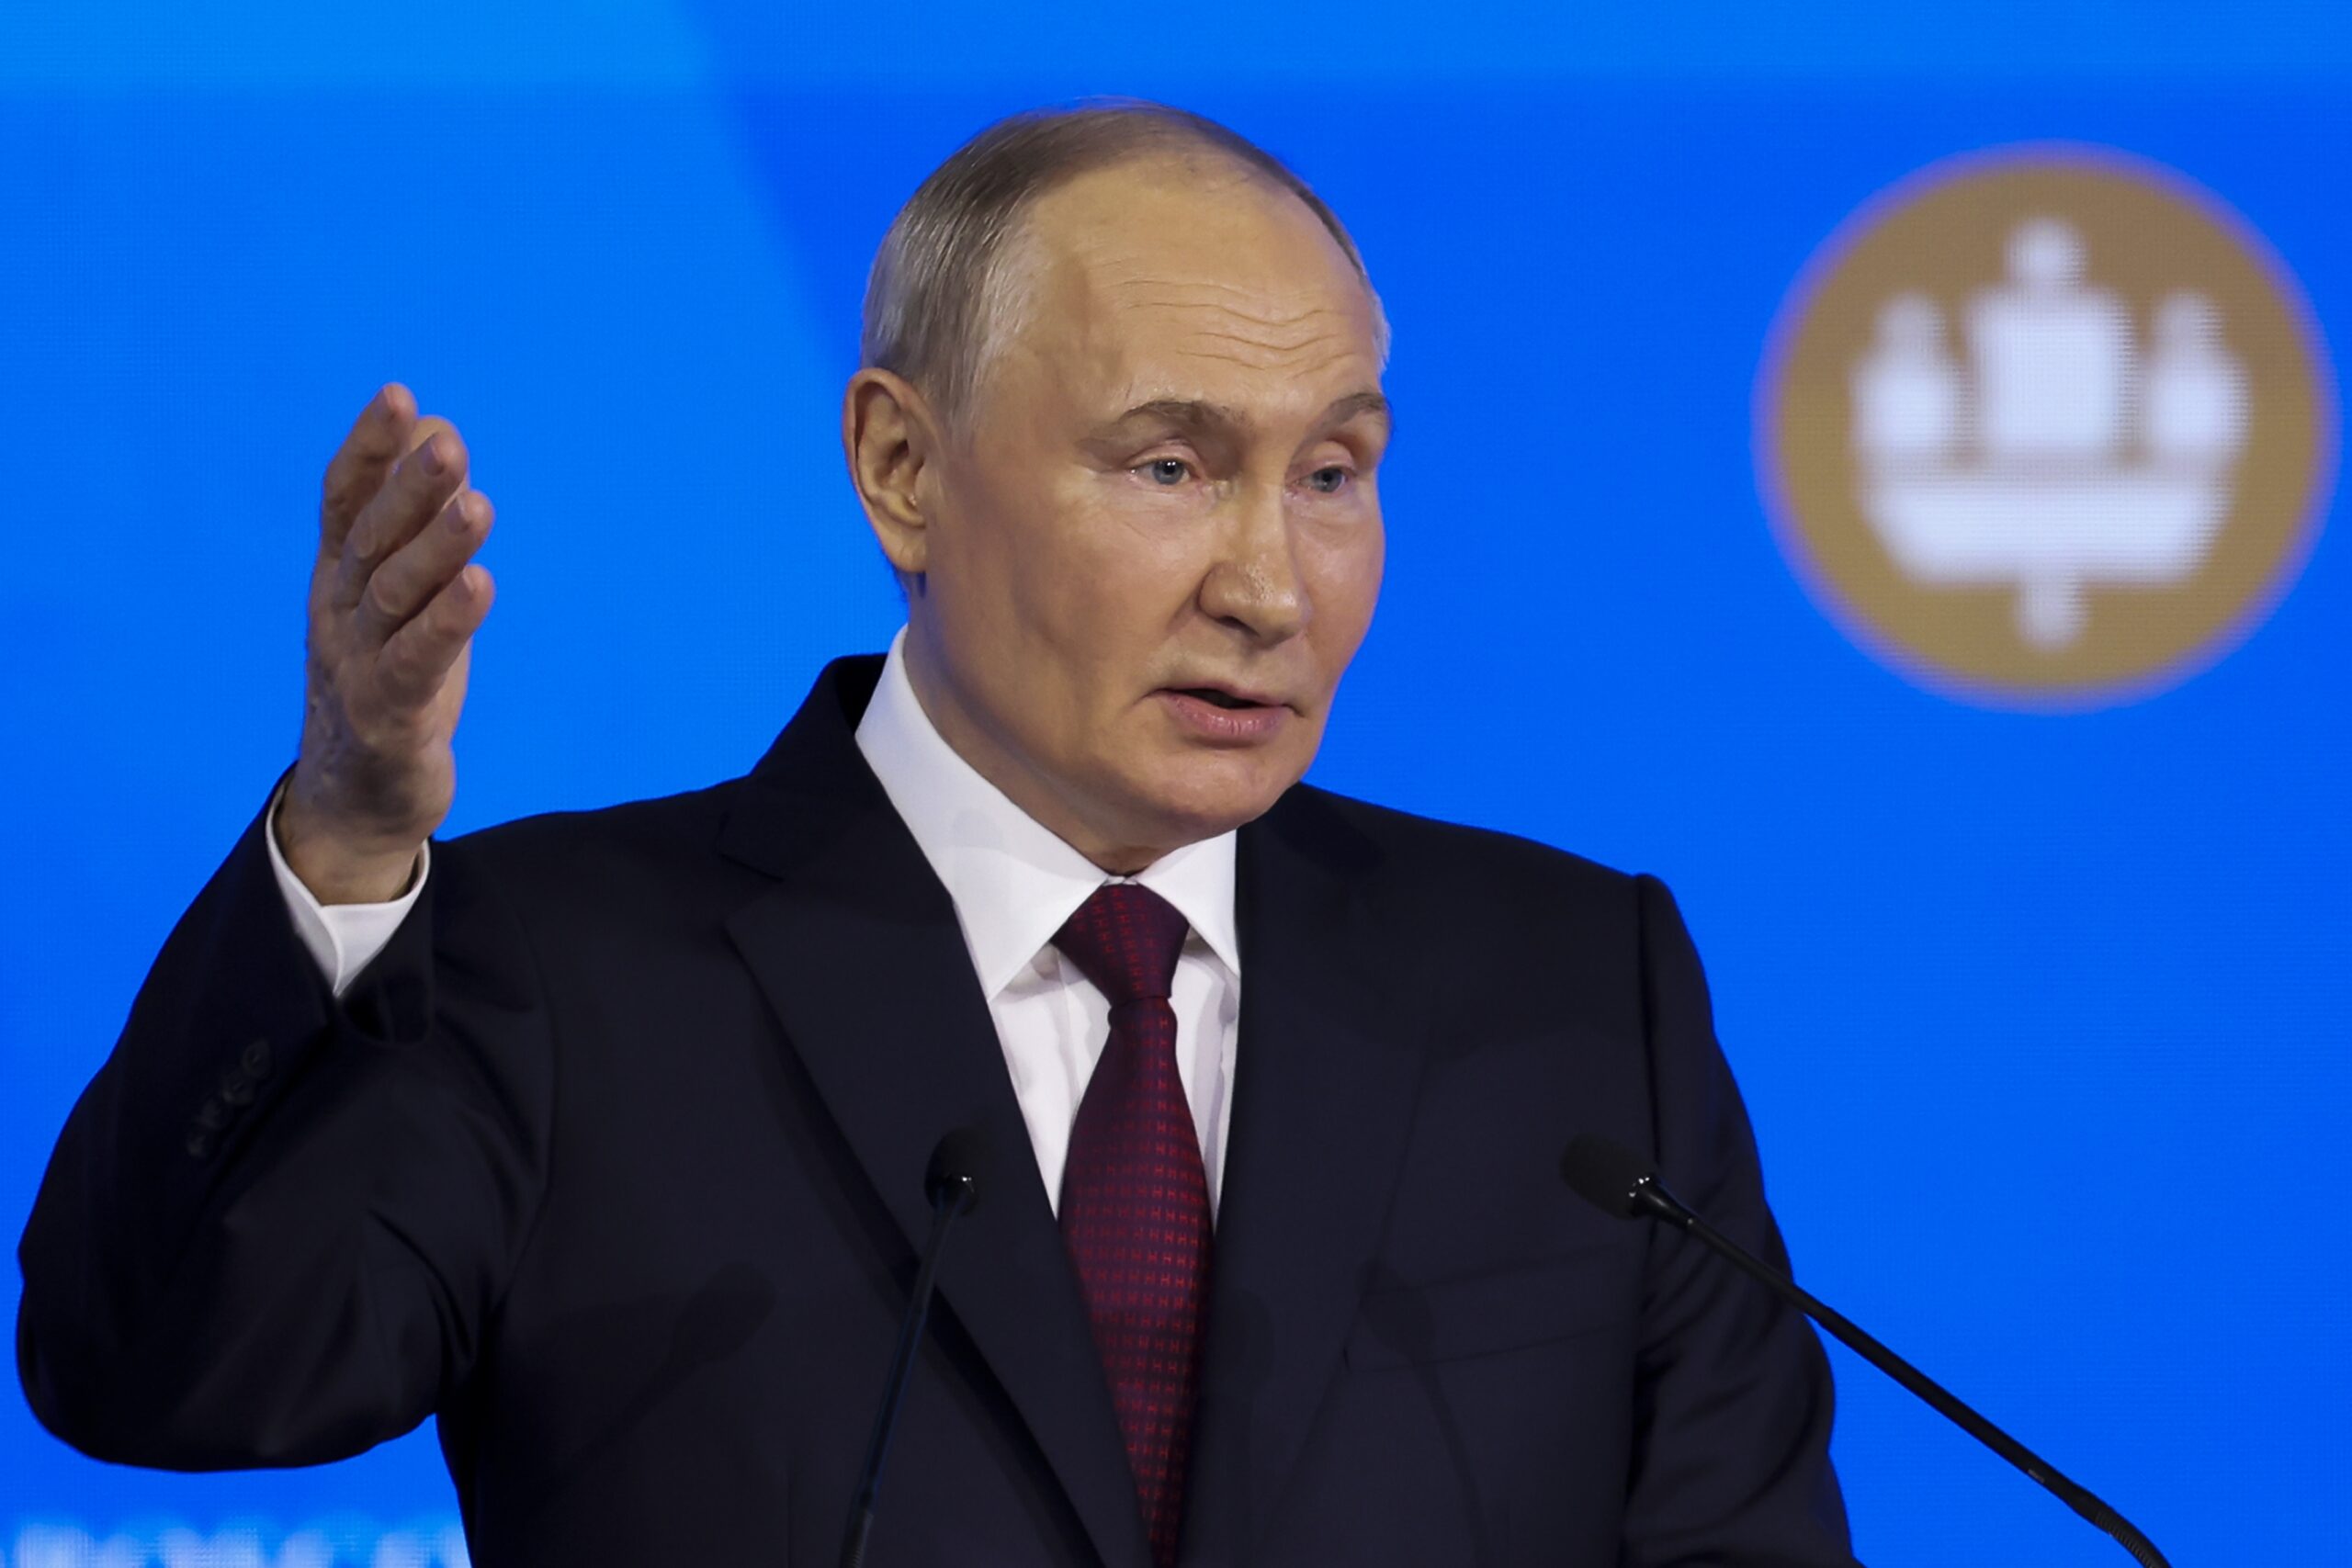 Putin sees no threat warranting use of nuclear arms